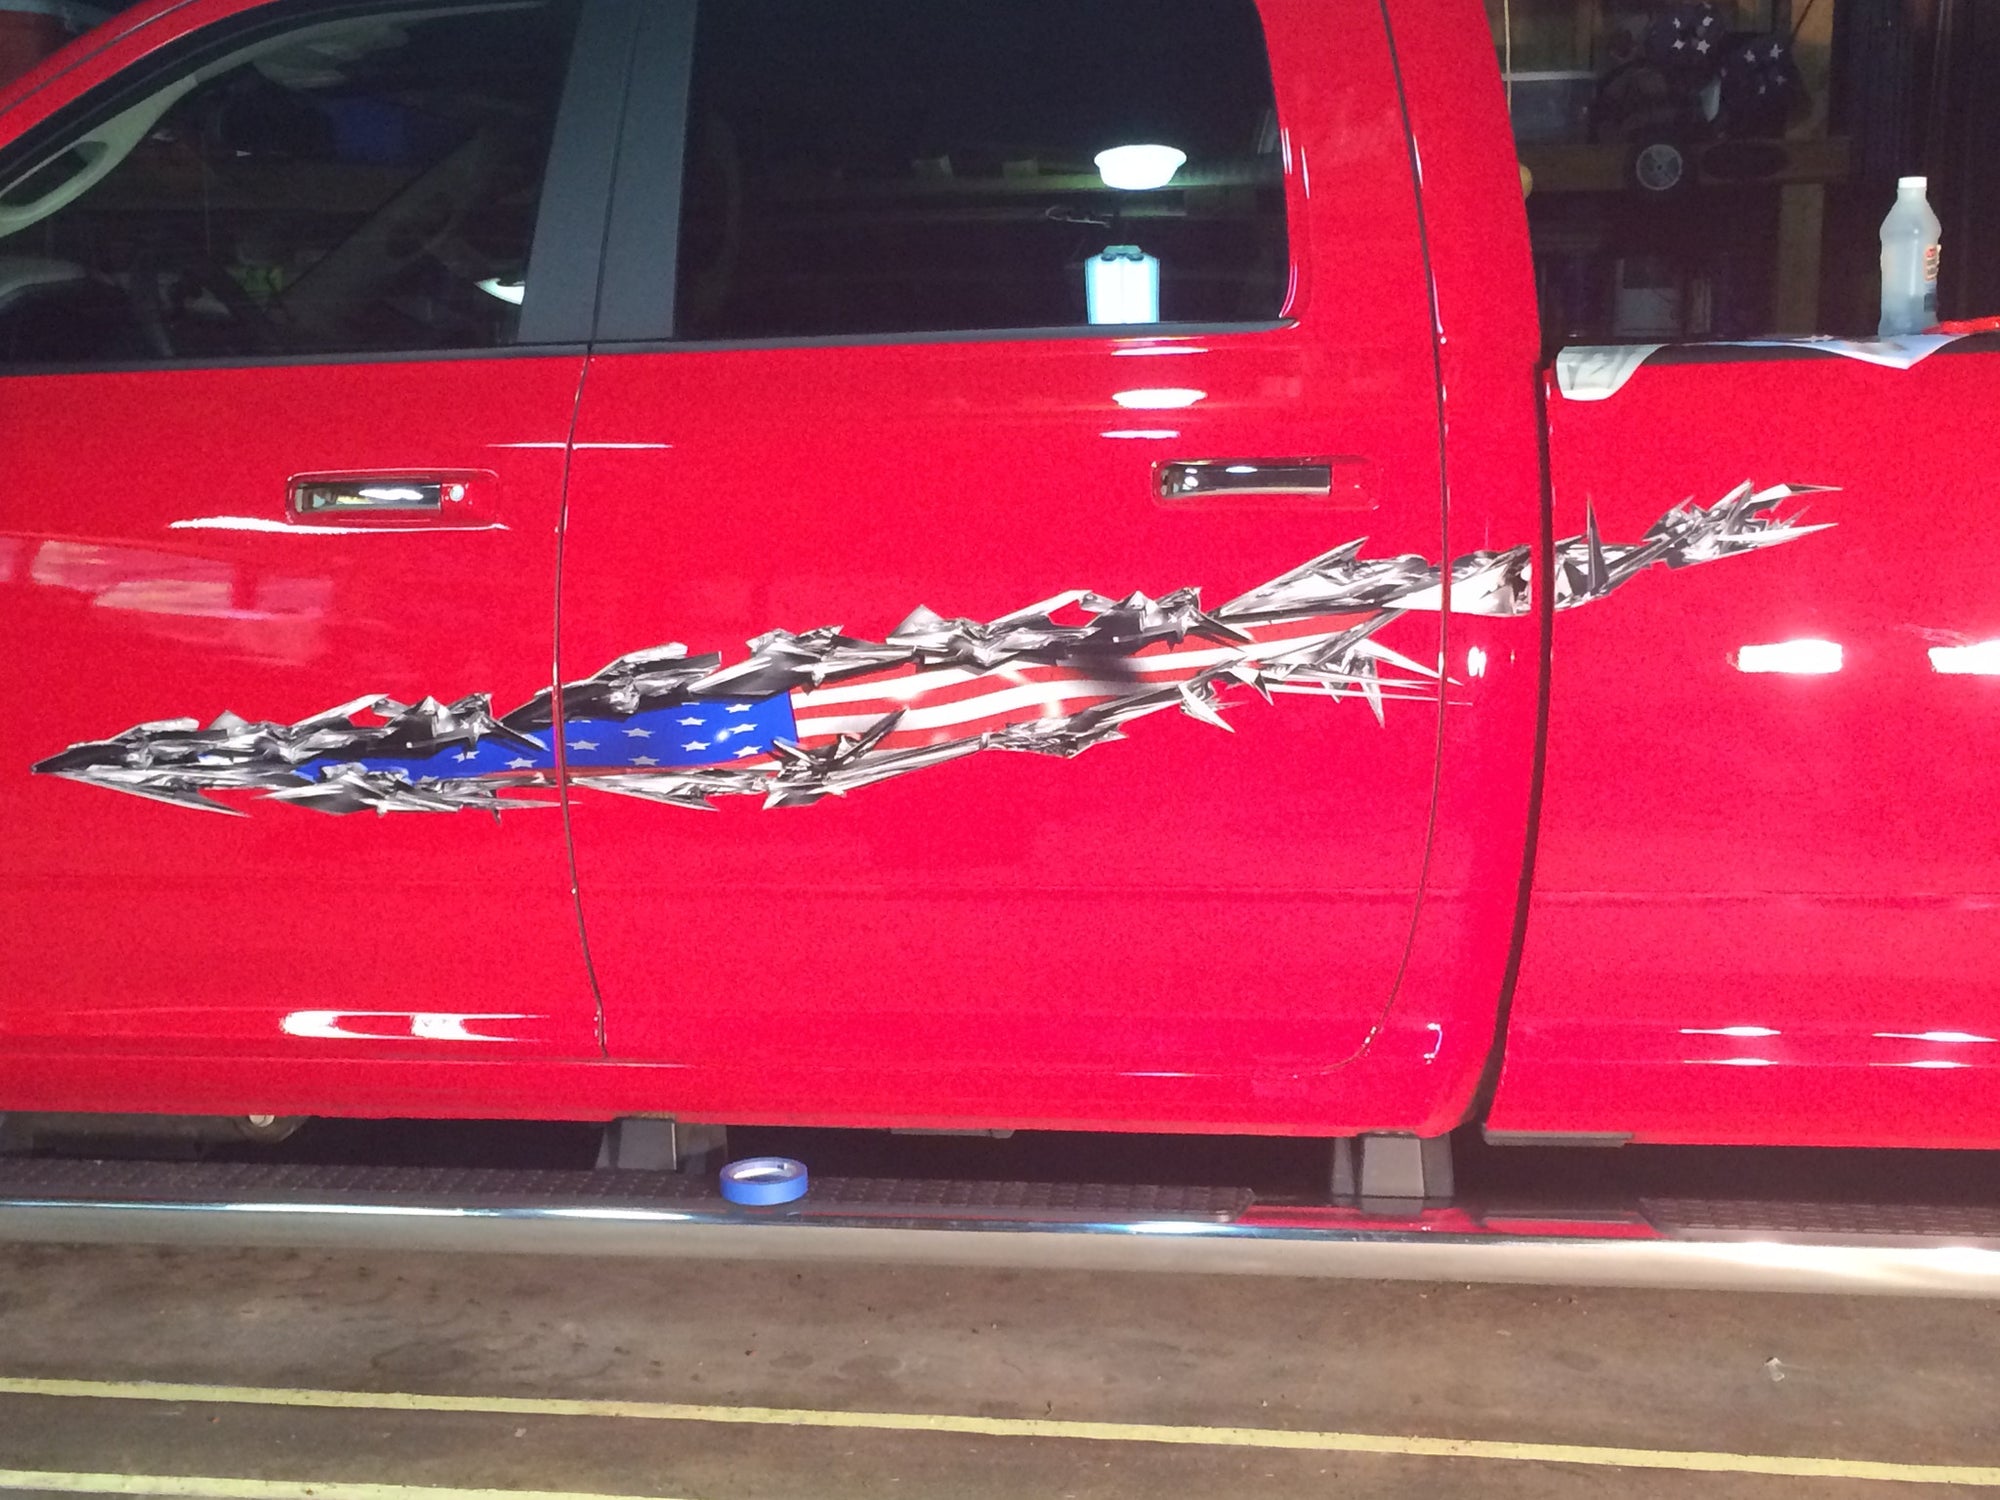 American flag tear side decals on red pickup truck